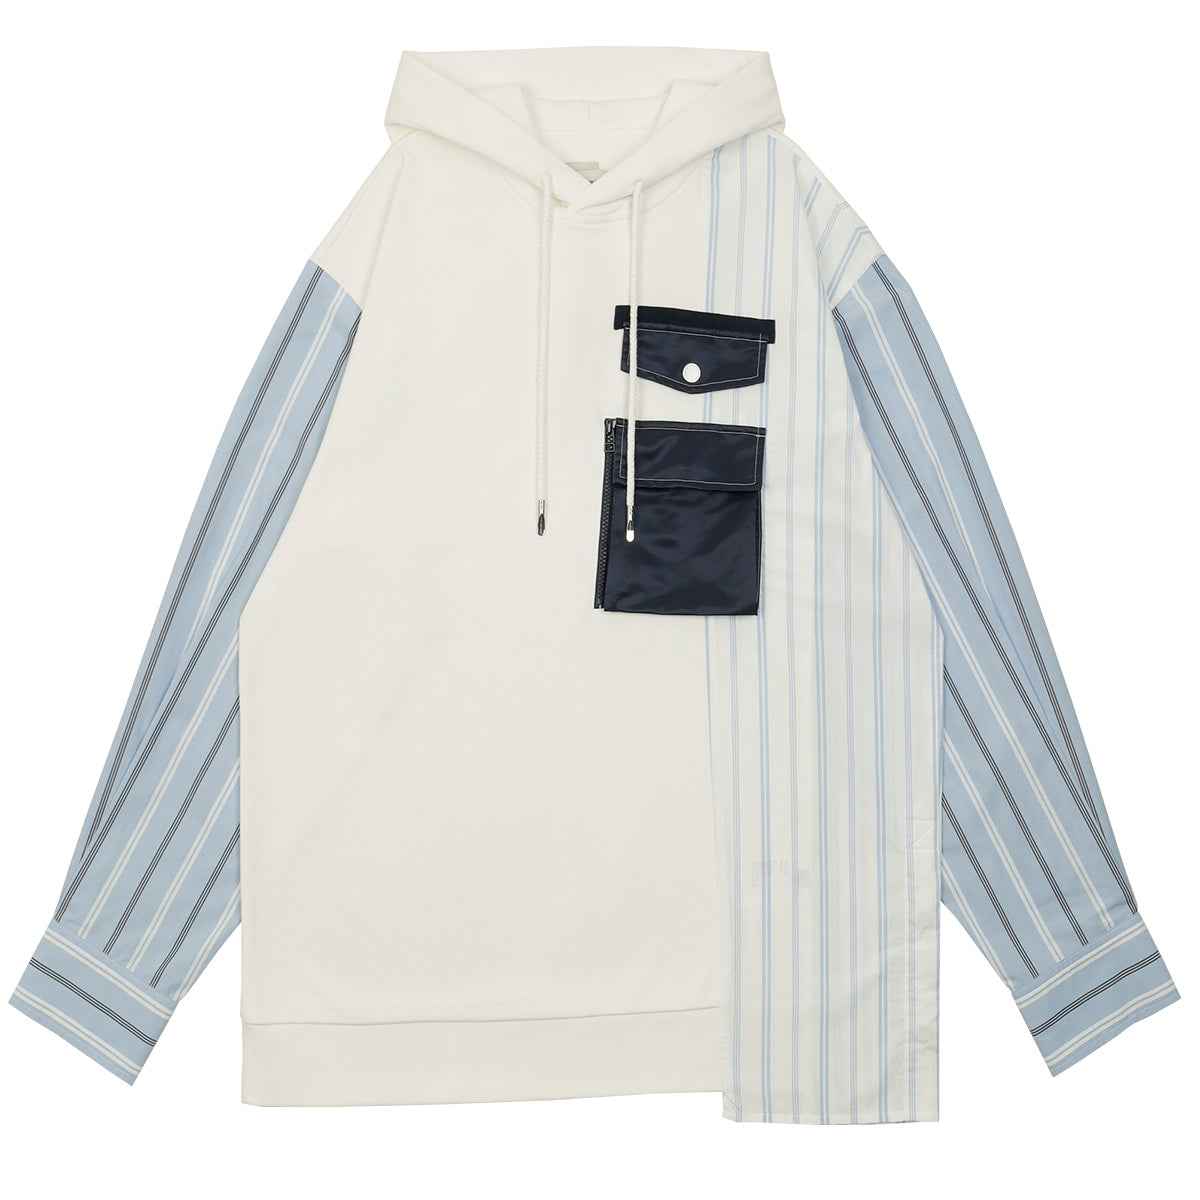 FenG CHen WANG (フェン・チェン・ワン) - JERSEY SHIRTING PANELLED